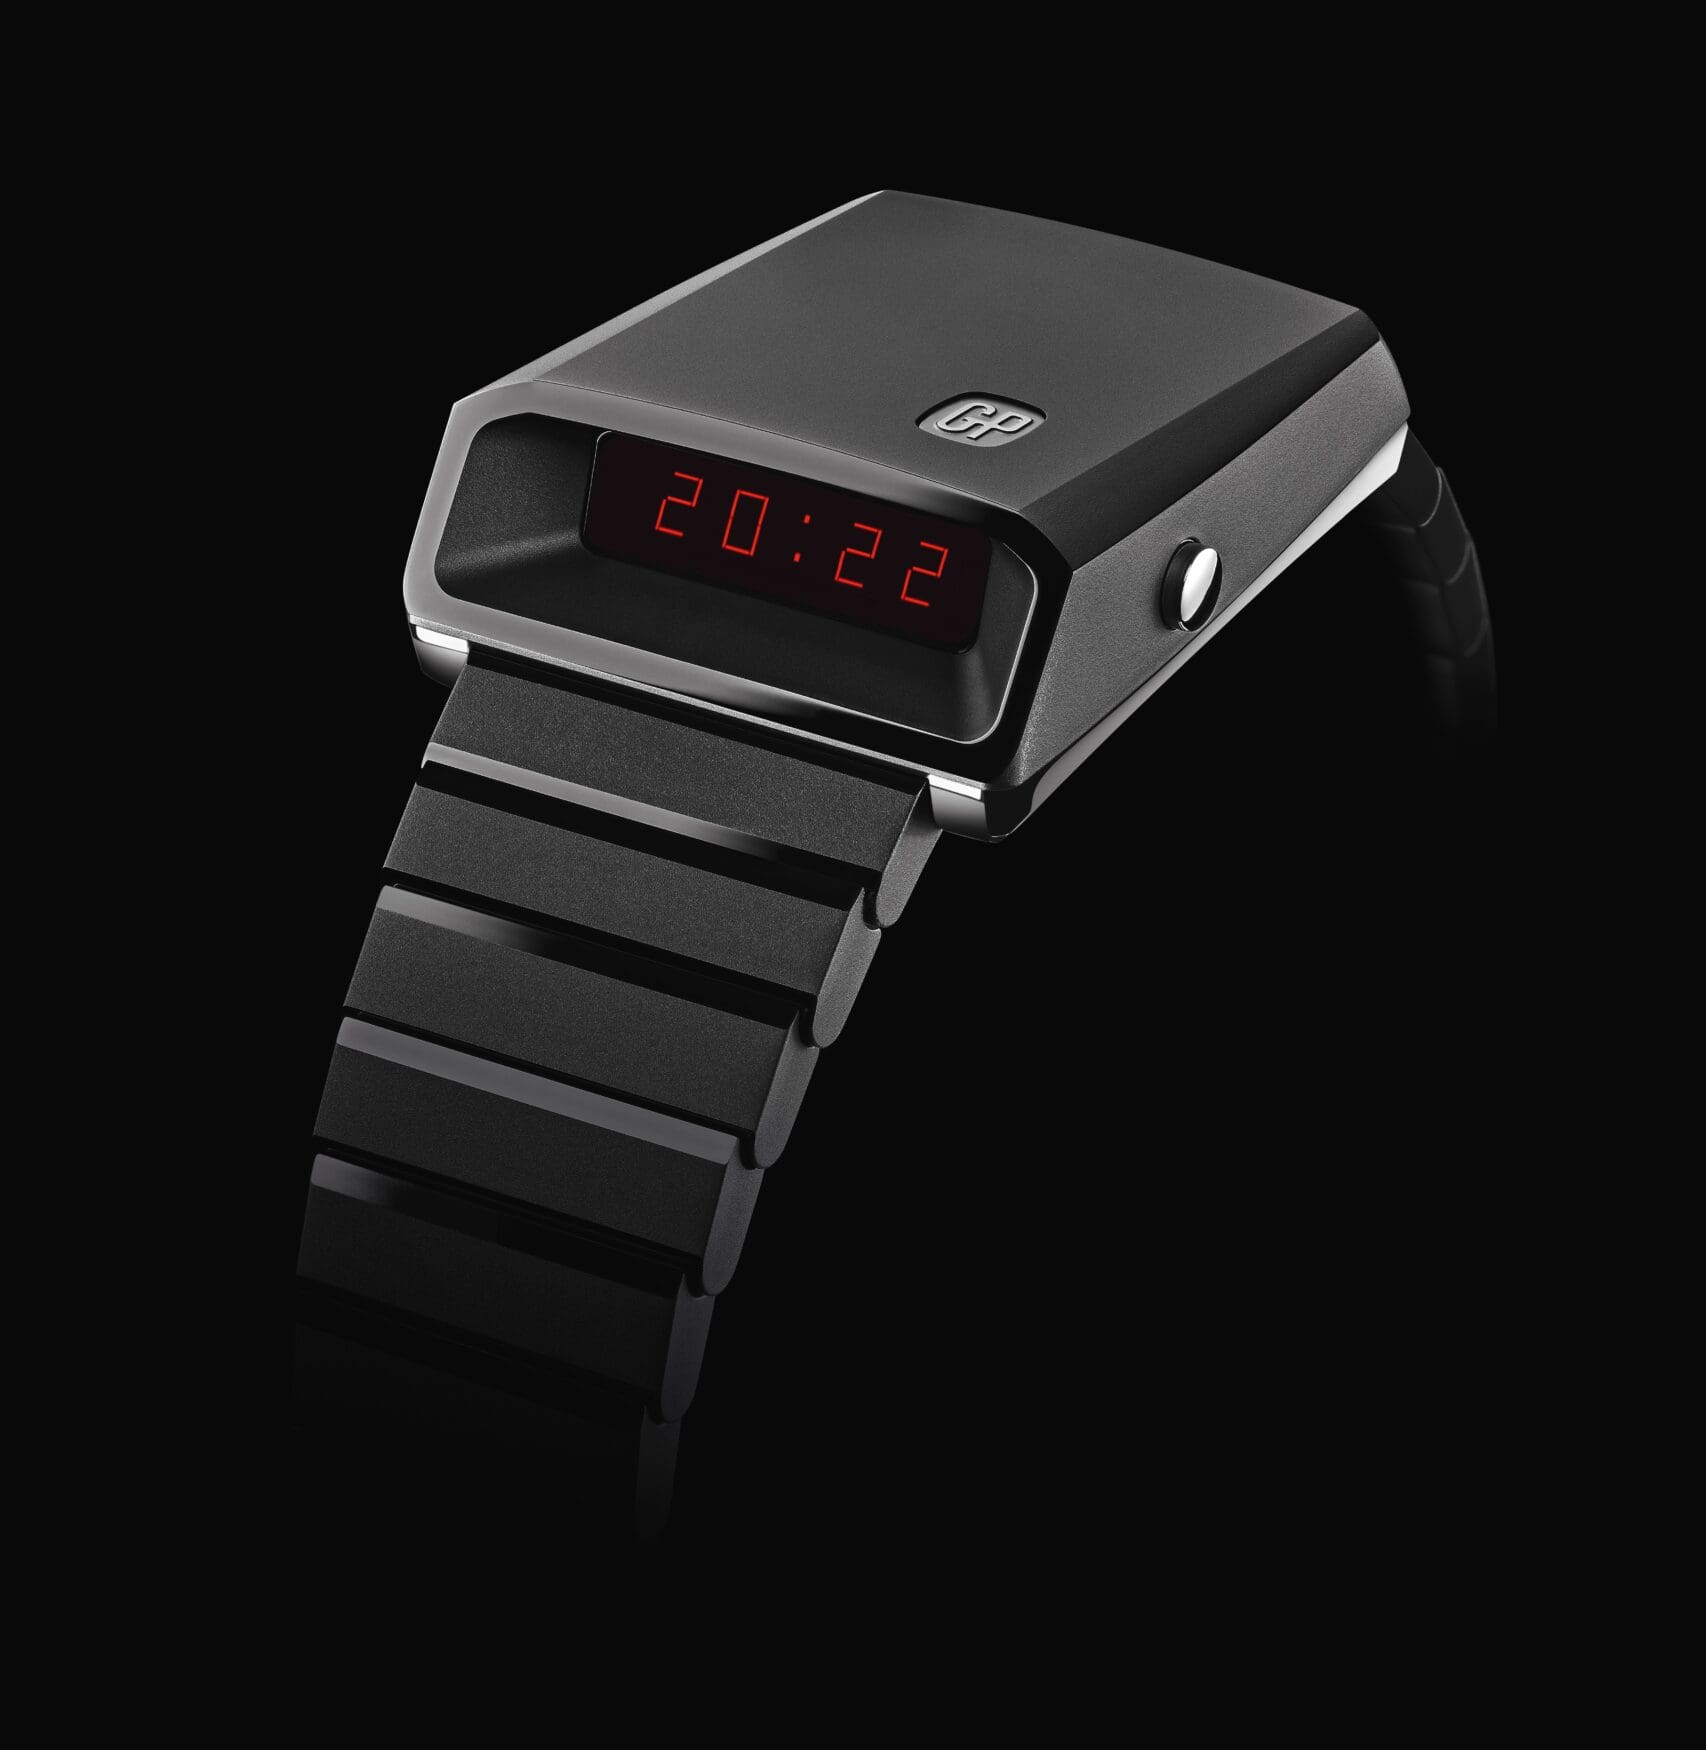 Five of the best modern LED watches